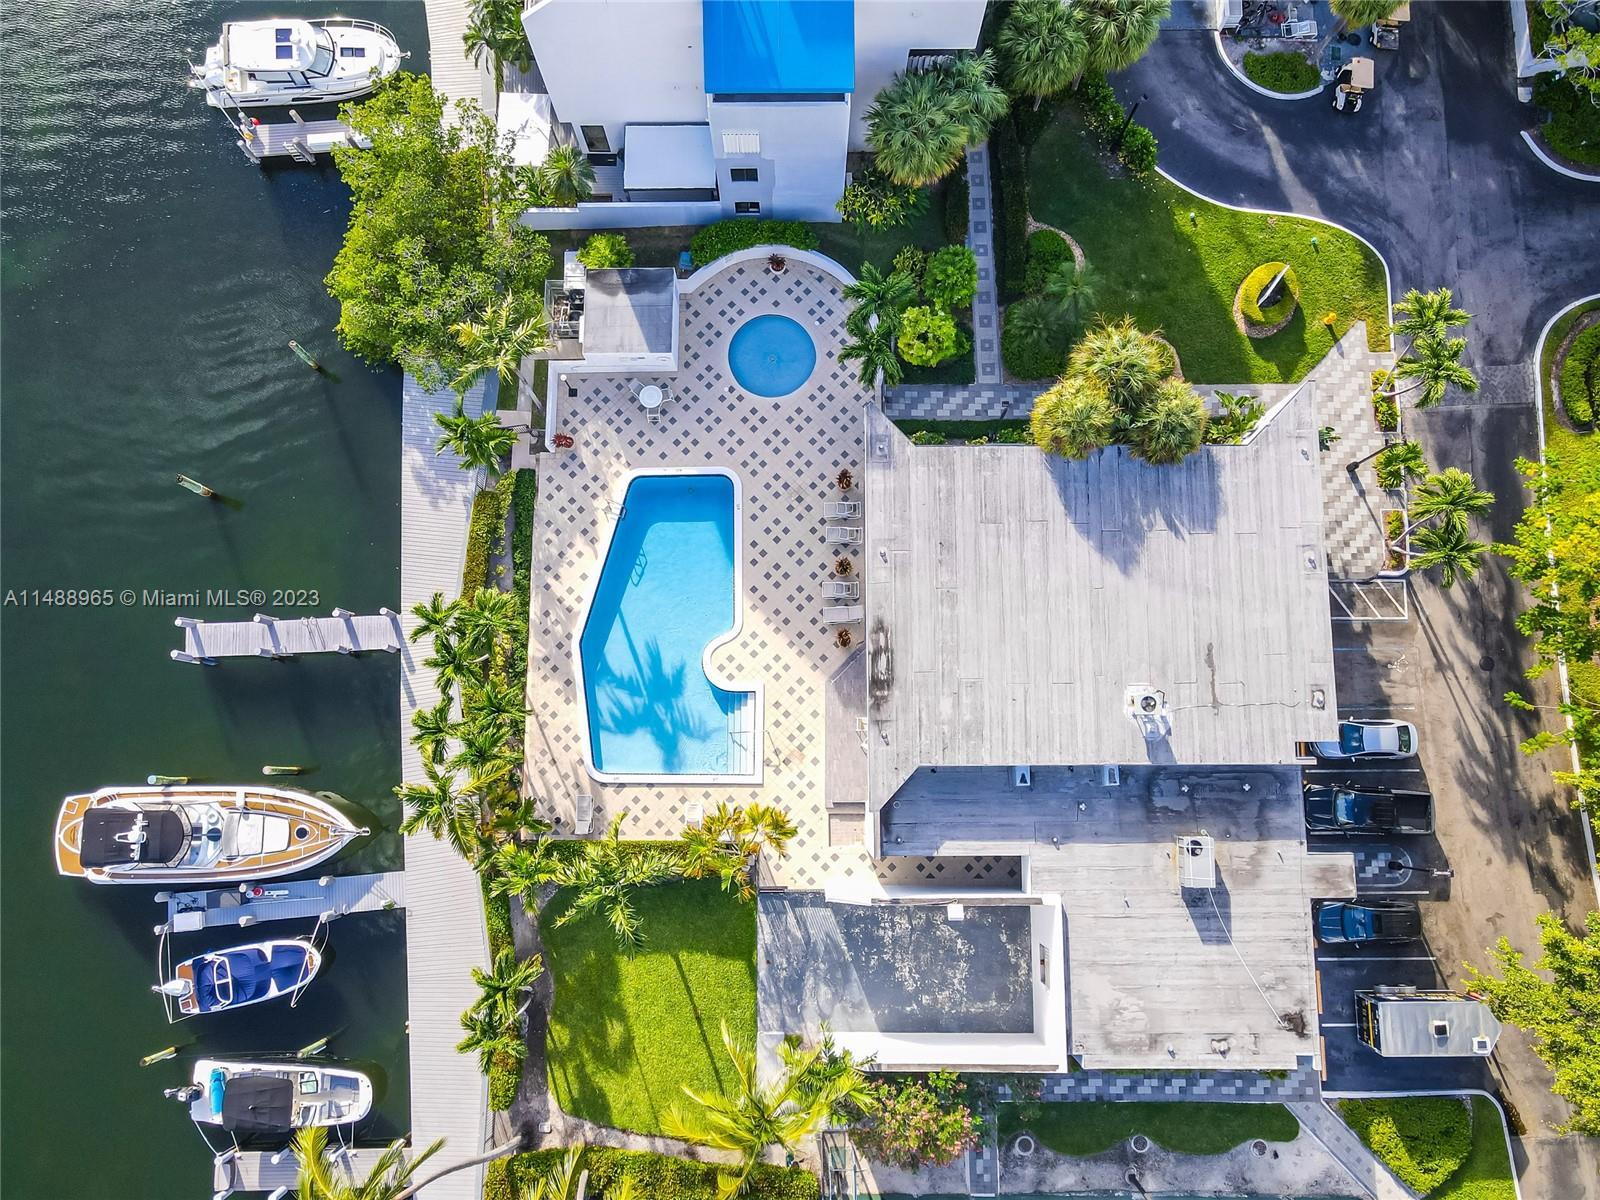 BOATERS THIS ONE IS FOR YOU! WELCOME TO THE EXCLUSIVE POINCIANA ISLAND YACHT & RACQUET CLUB. THIS ST